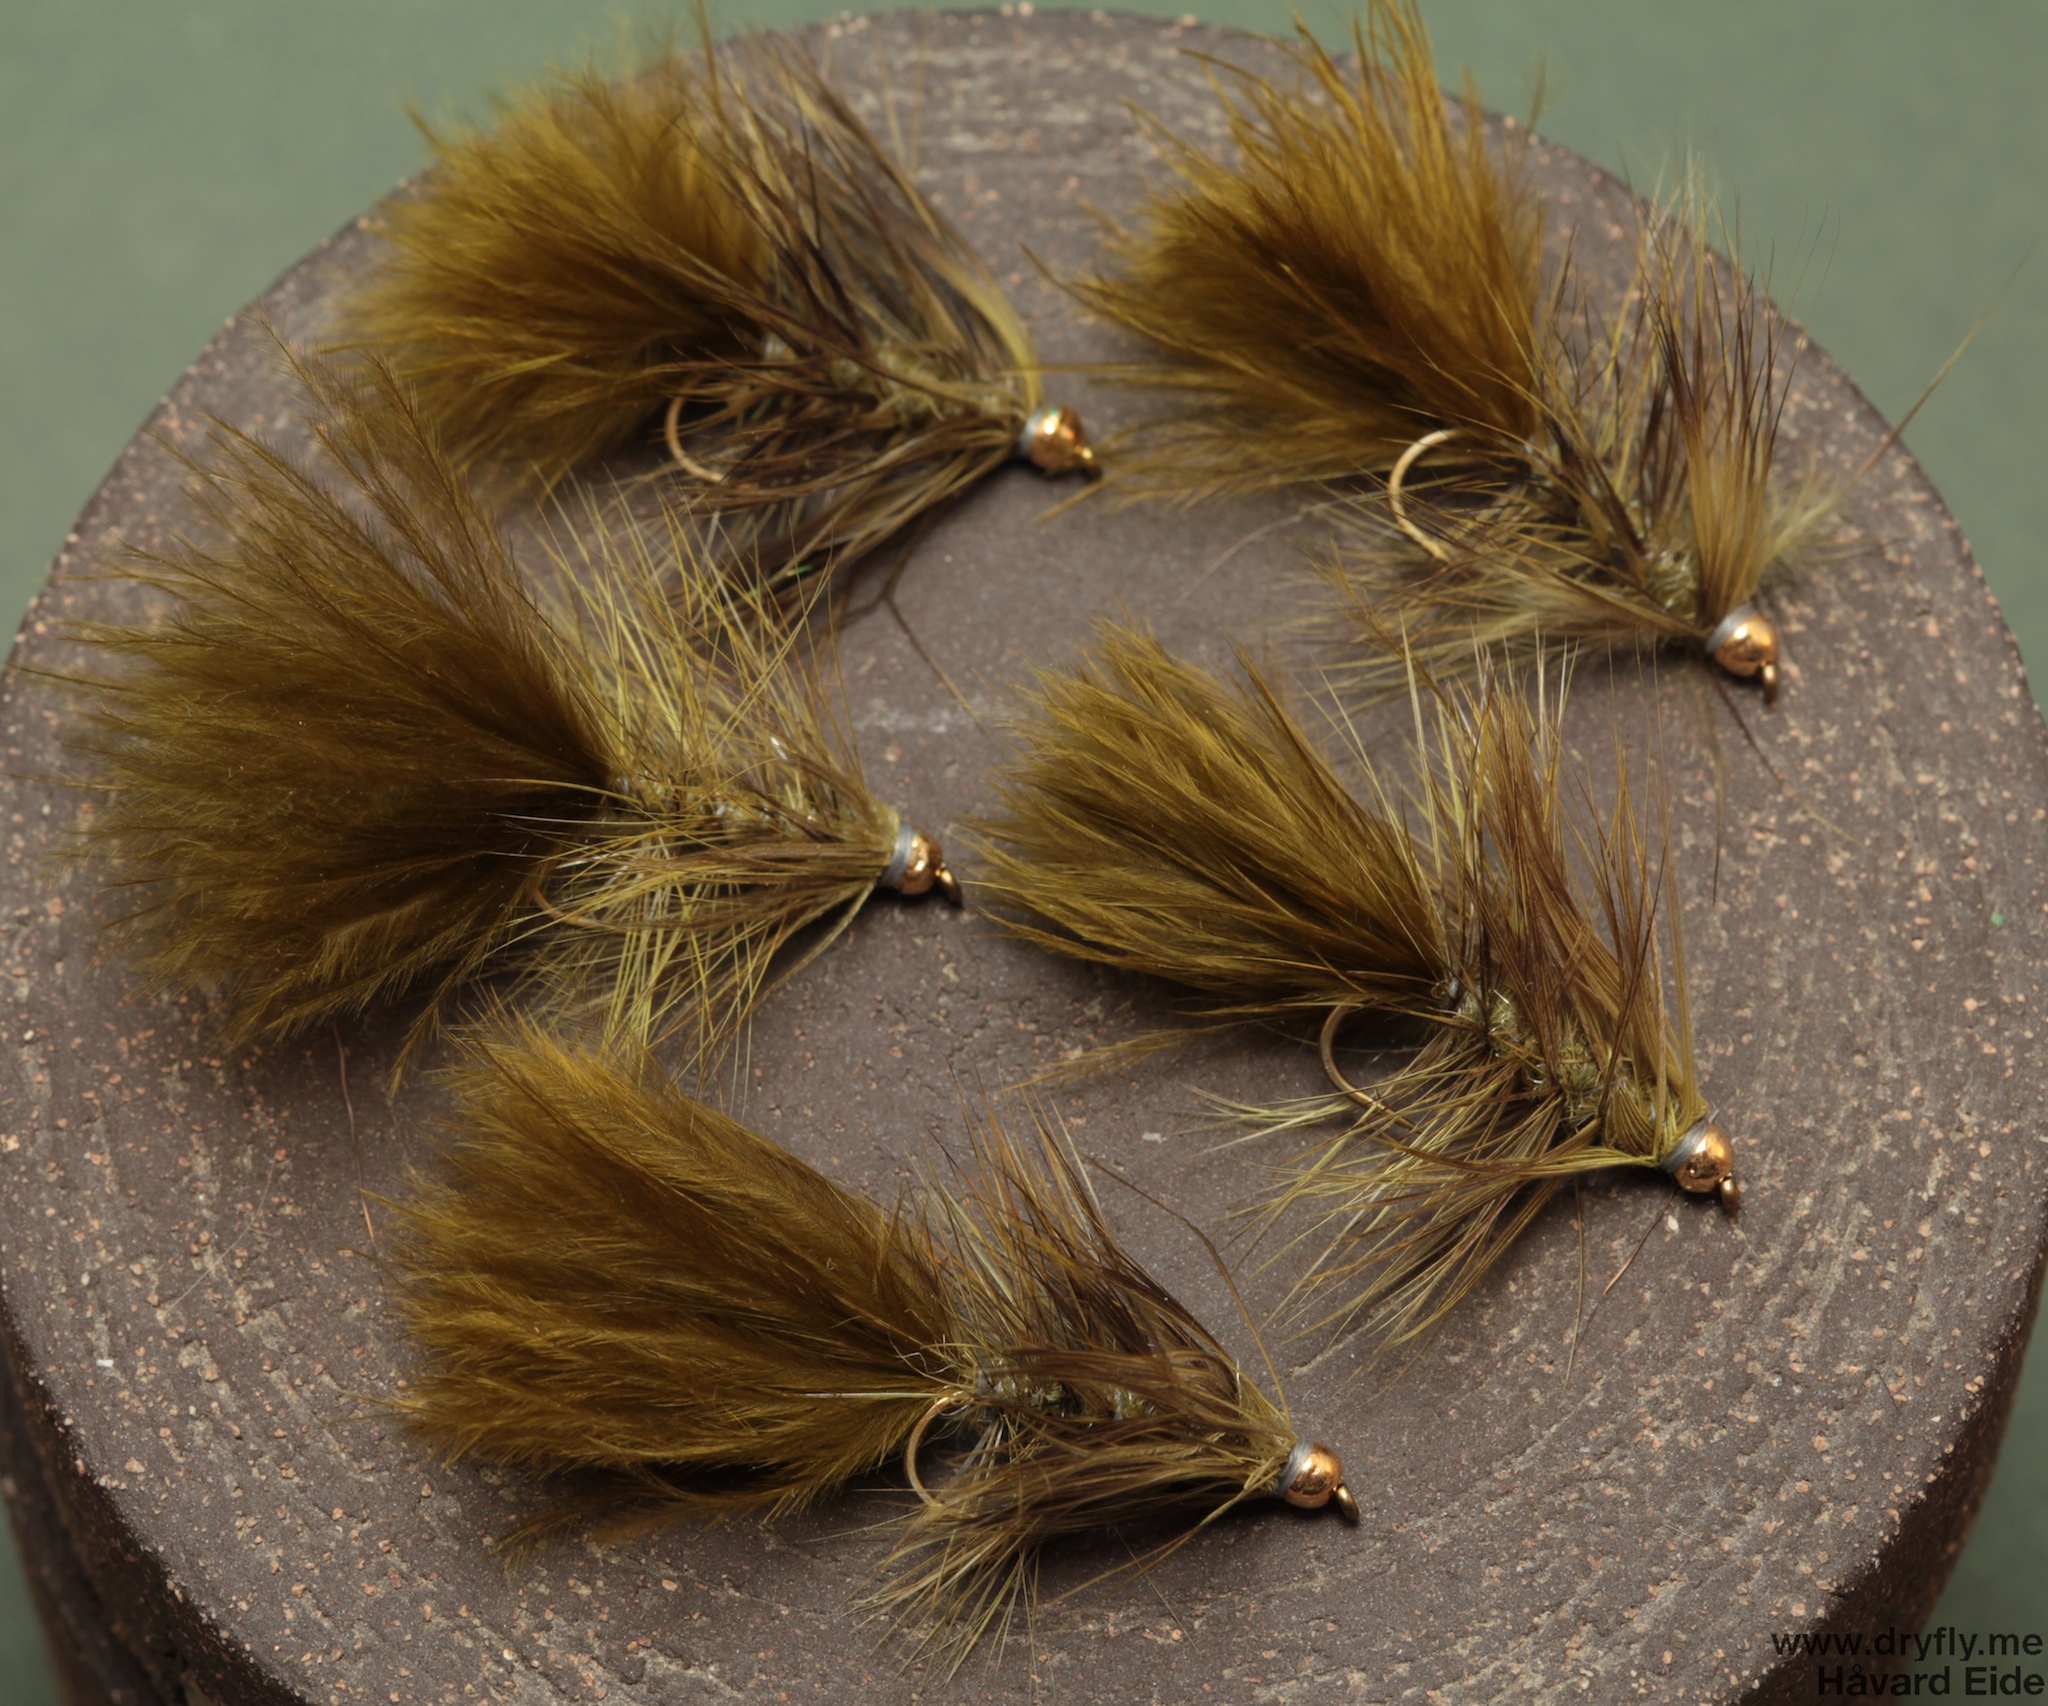 Olive Woolly Bugger | flyfisher.org